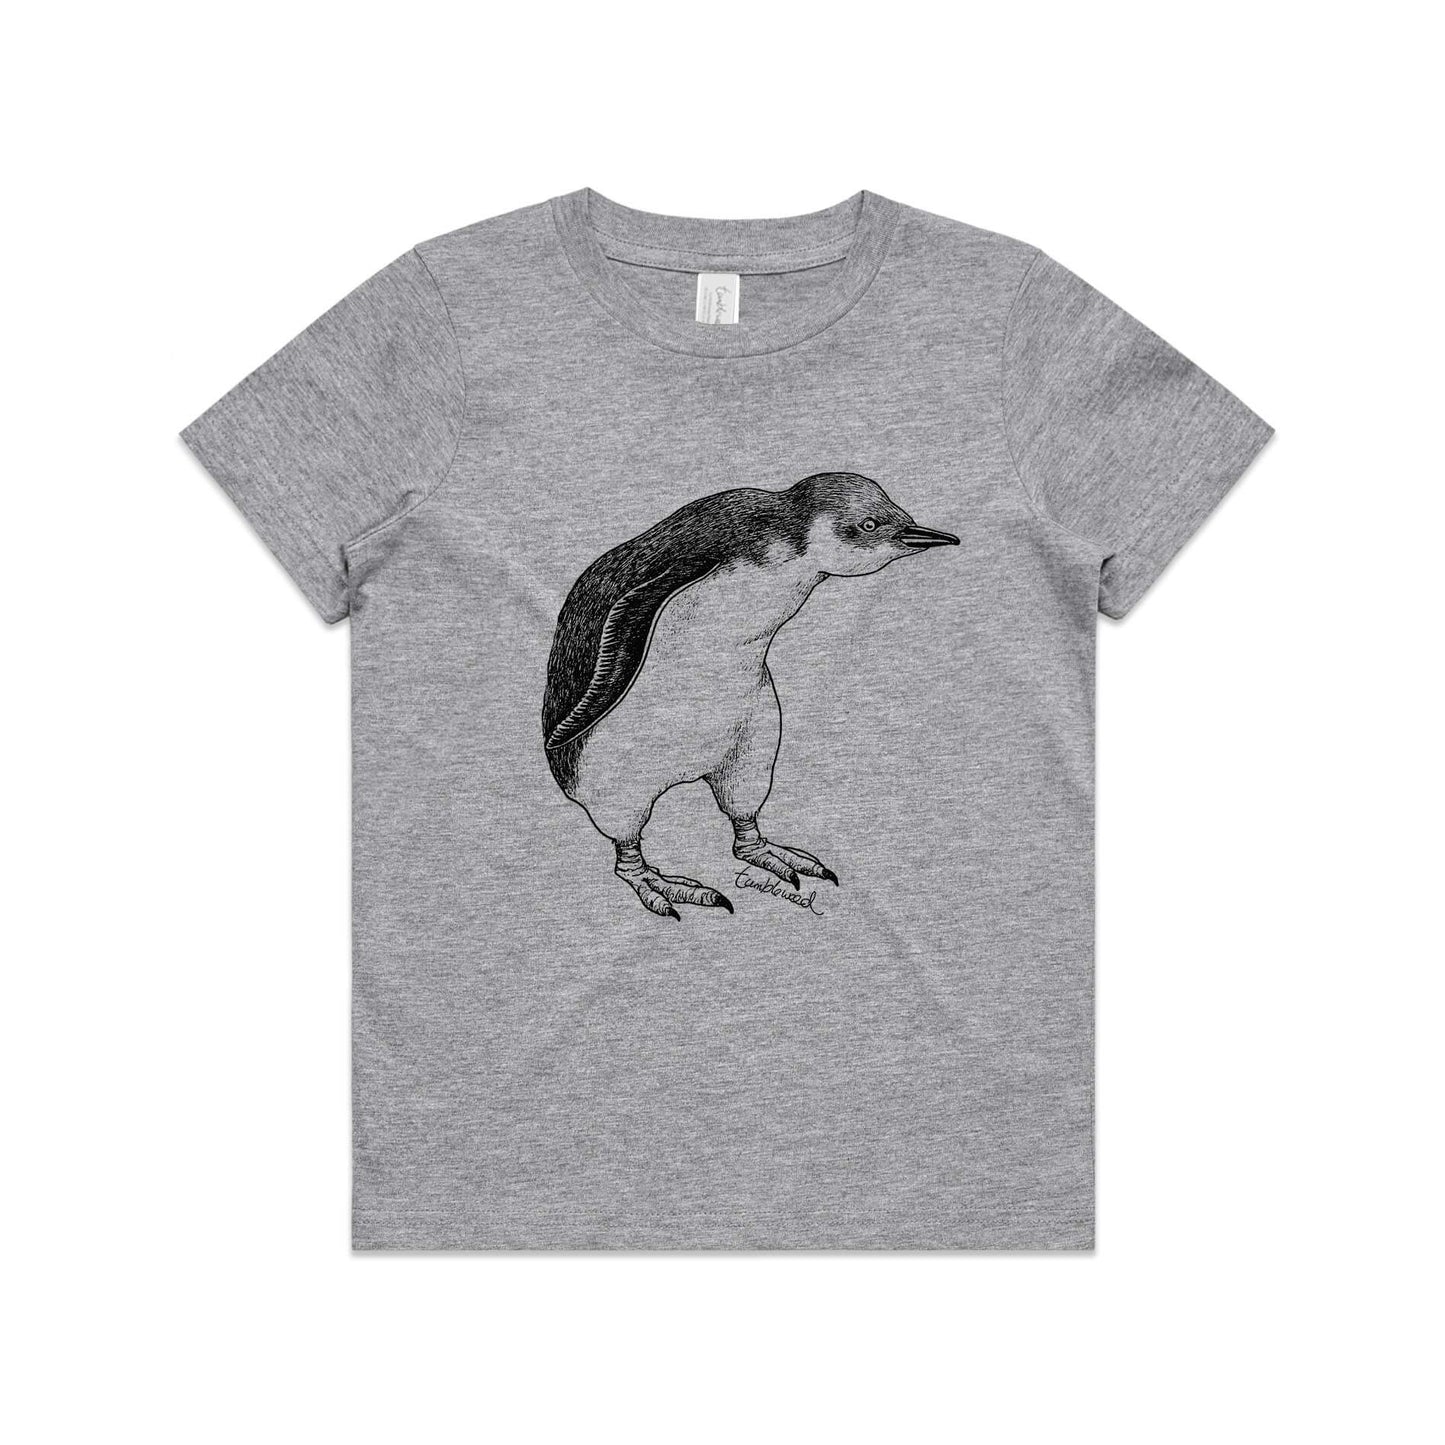 Grey marle, cotton kids' t-shirt with screen printed Kids little penguin design.